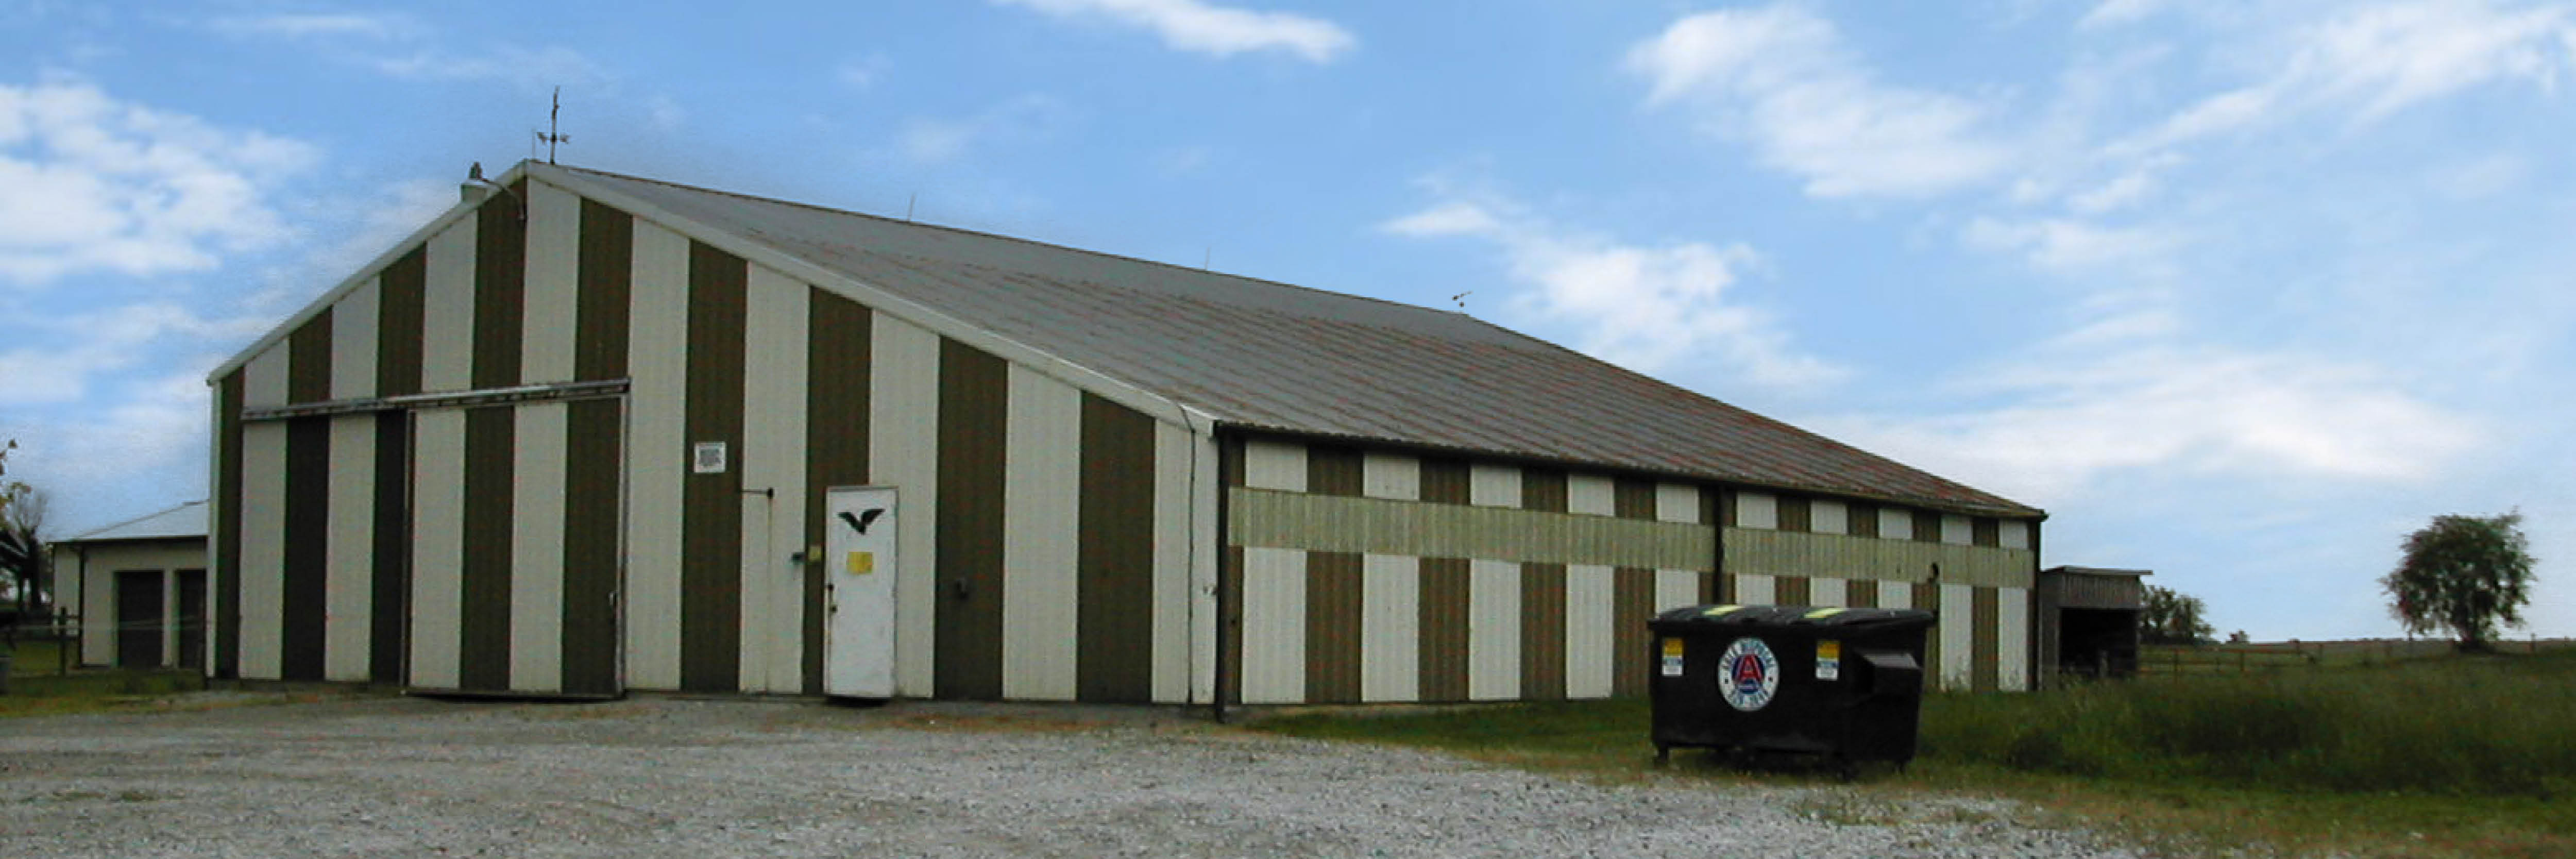 How Much Does It Cost to Reskin a 60’ x 80’ Pole Barn?